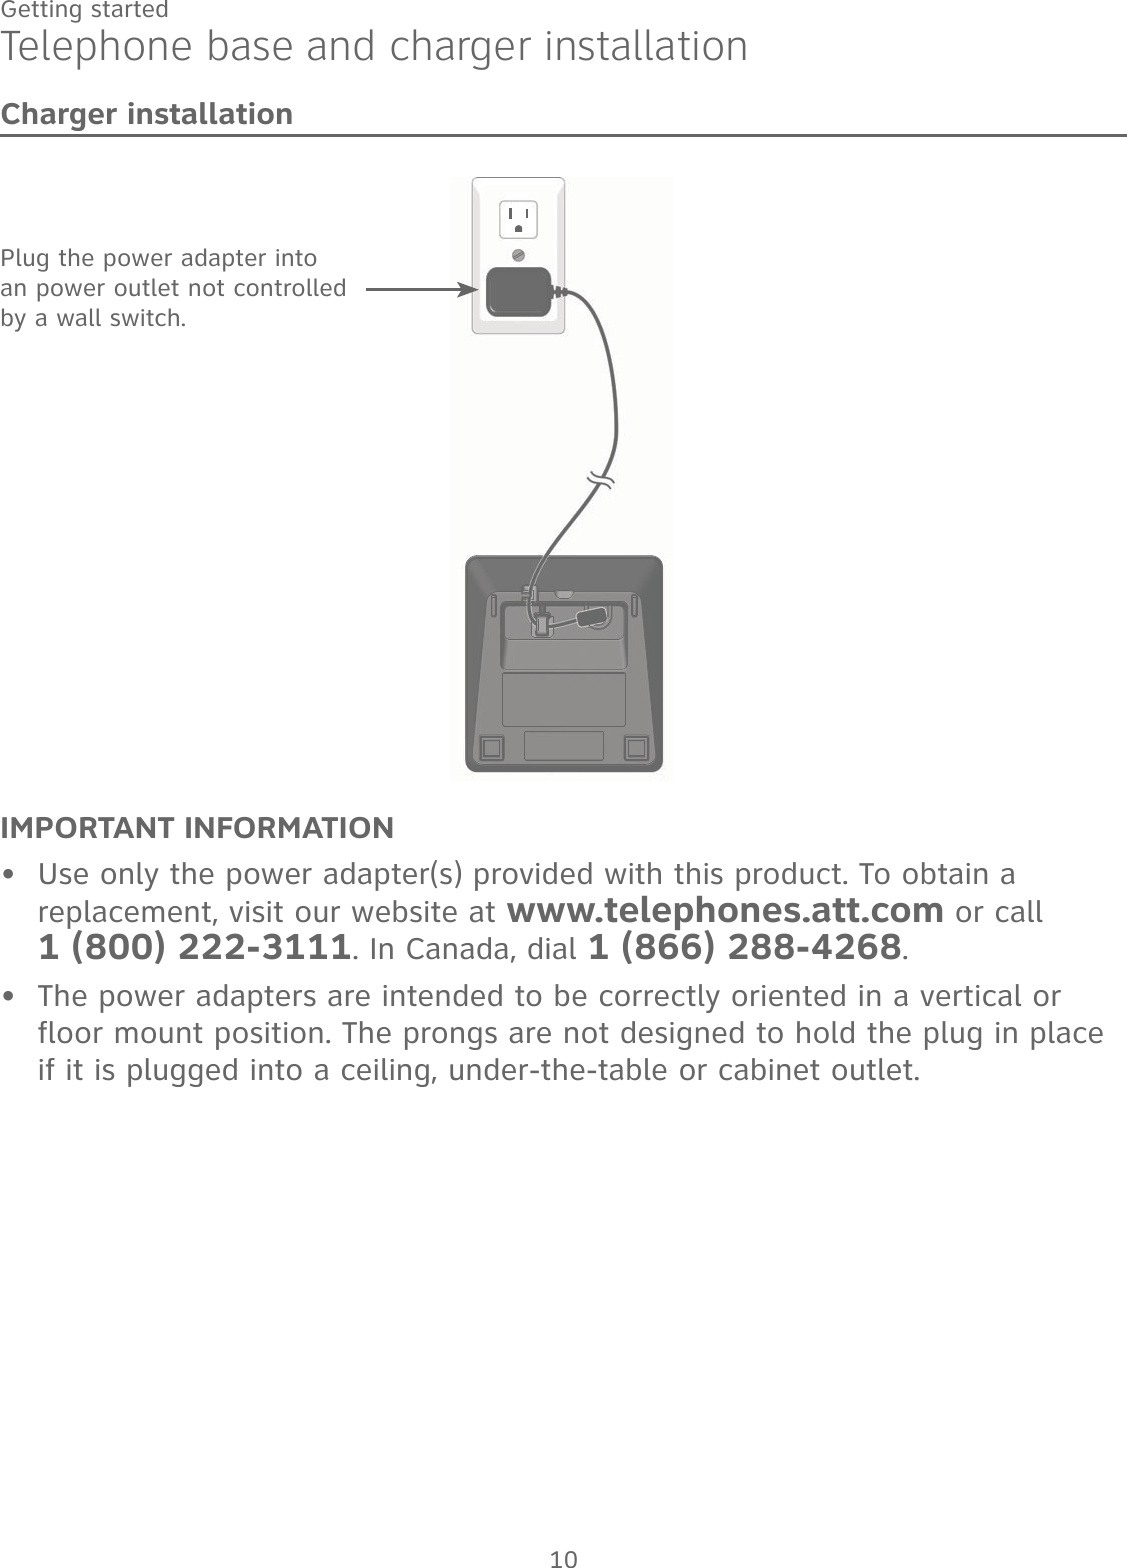 10Getting startedTelephone base and charger installationCharger installationIMPORTANT INFORMATIONUse only the power adapter(s) provided with this product. To obtain a replacement, visit our website at www.telephones.att.com or call  1 (800) 222-3111. In Canada, dial 1 (866) 288-4268.The power adapters are intended to be correctly oriented in a vertical or floor mount position. The prongs are not designed to hold the plug in place if it is plugged into a ceiling, under-the-table or cabinet outlet.••Plug the power adapter into an power outlet not controlled by a wall switch.